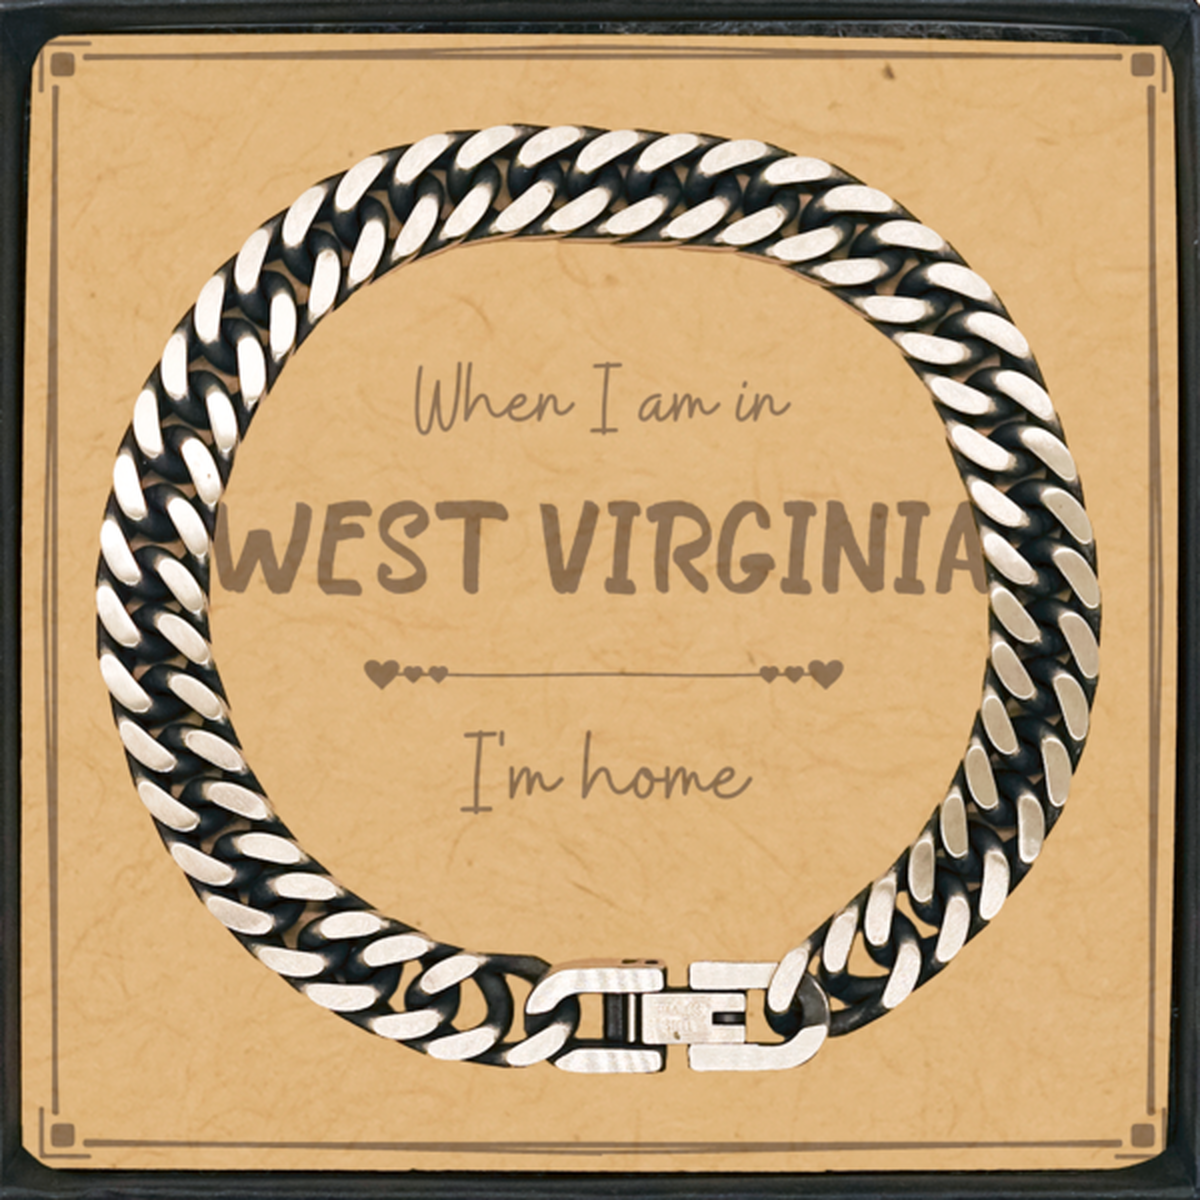 When I am in West Virginia I'm home Cuban Link Chain Bracelet, Message Card Gifts For West Virginia, State West Virginia Birthday Gifts for Friends Coworker